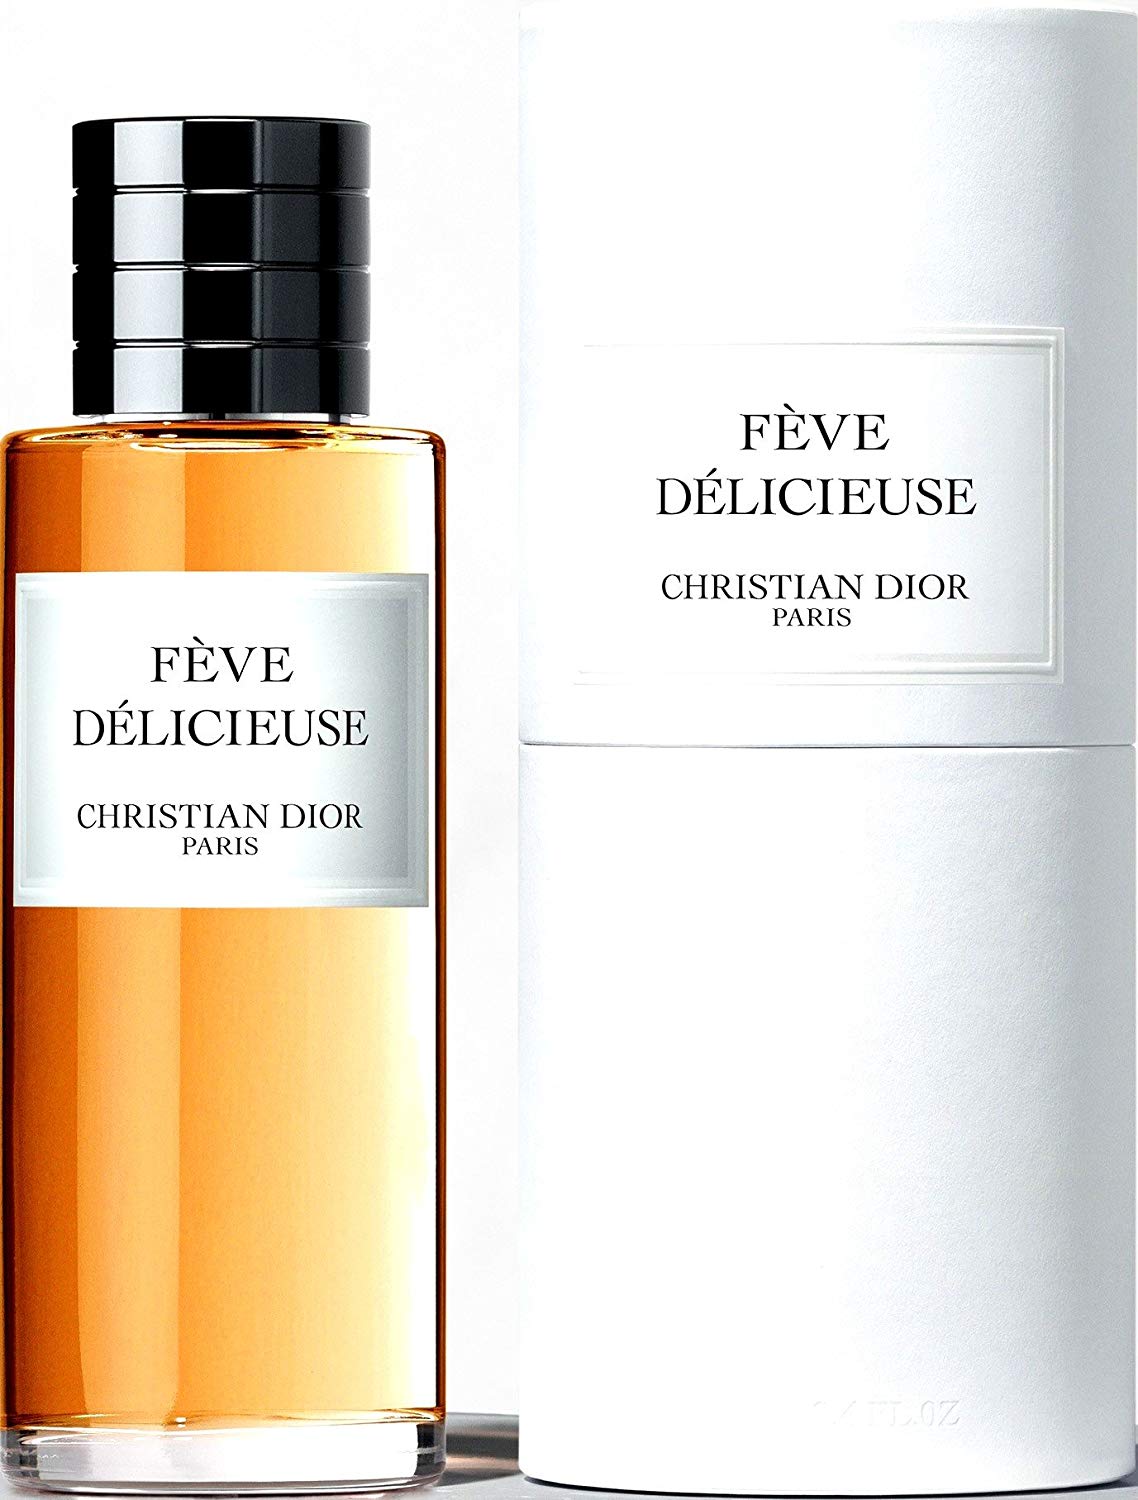 dior perfume feve delicieuse, OFF 79%,Buy!